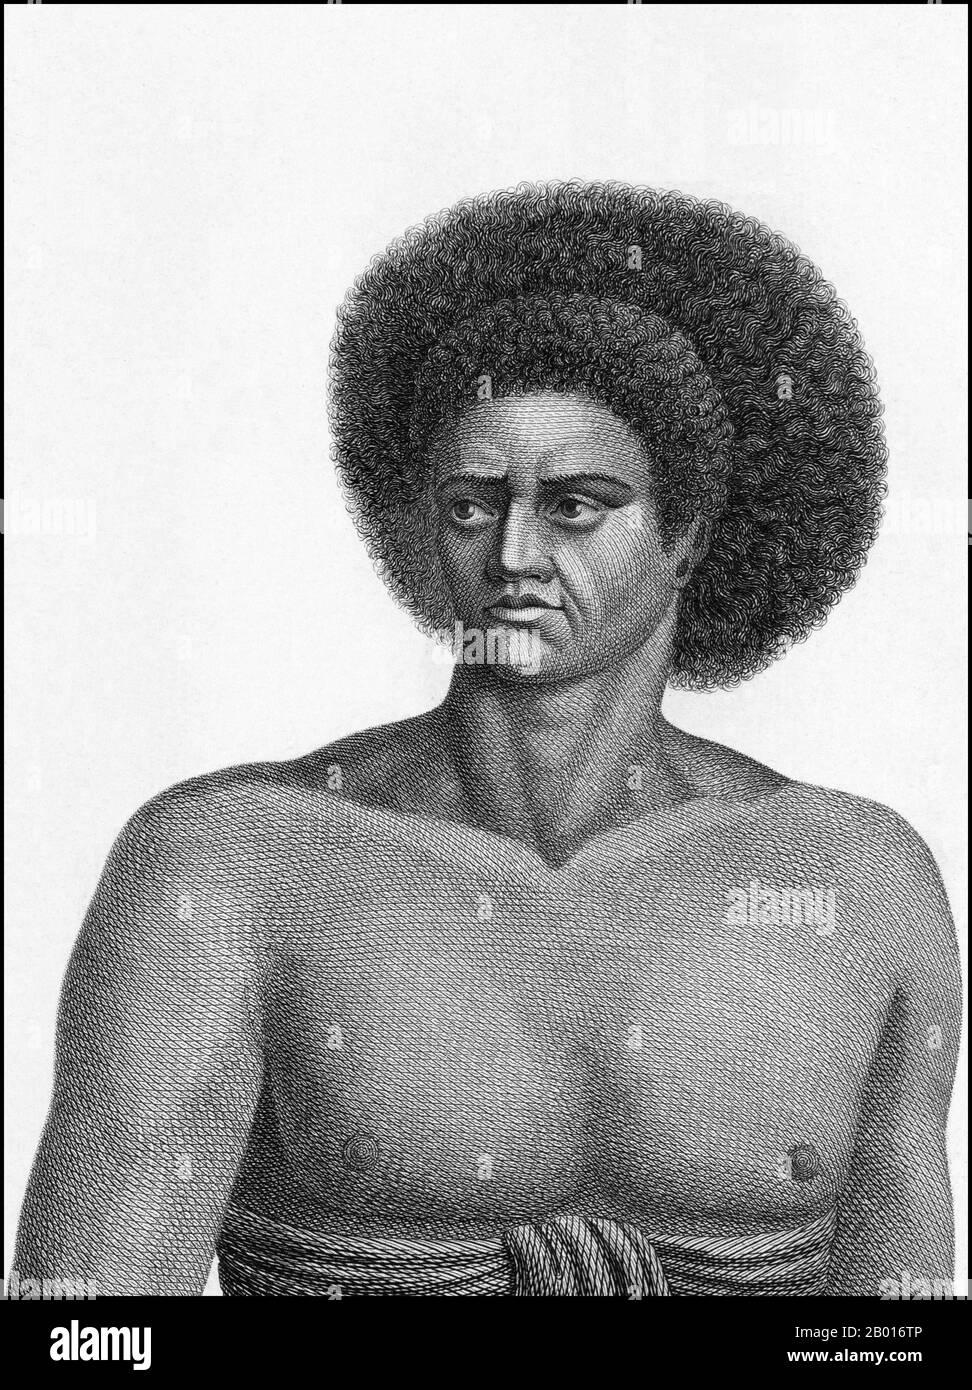 Fiji: A Fijian man. Engraving from 'Atlas du Voyage de La Pérouse' by Jean Piron (1767-1797) & Jacques-Louis Copia (1764-1799), 1792.  Jean-François de Galaup, Comte de La Pérouse (1741-1788) was a French explorer and naval officer. In 1785, the King of France commissioned La Perouse to head an expedition to explore the Pacific Ocean, to investigate whaling and fur prospects, and to establish French claims in this area. La Pérouse had admired the explorer James Cook, and wanted to continue his work. La Perouse was assigned two 500-ton ships called the Astrolabe and the Boussole. Stock Photo